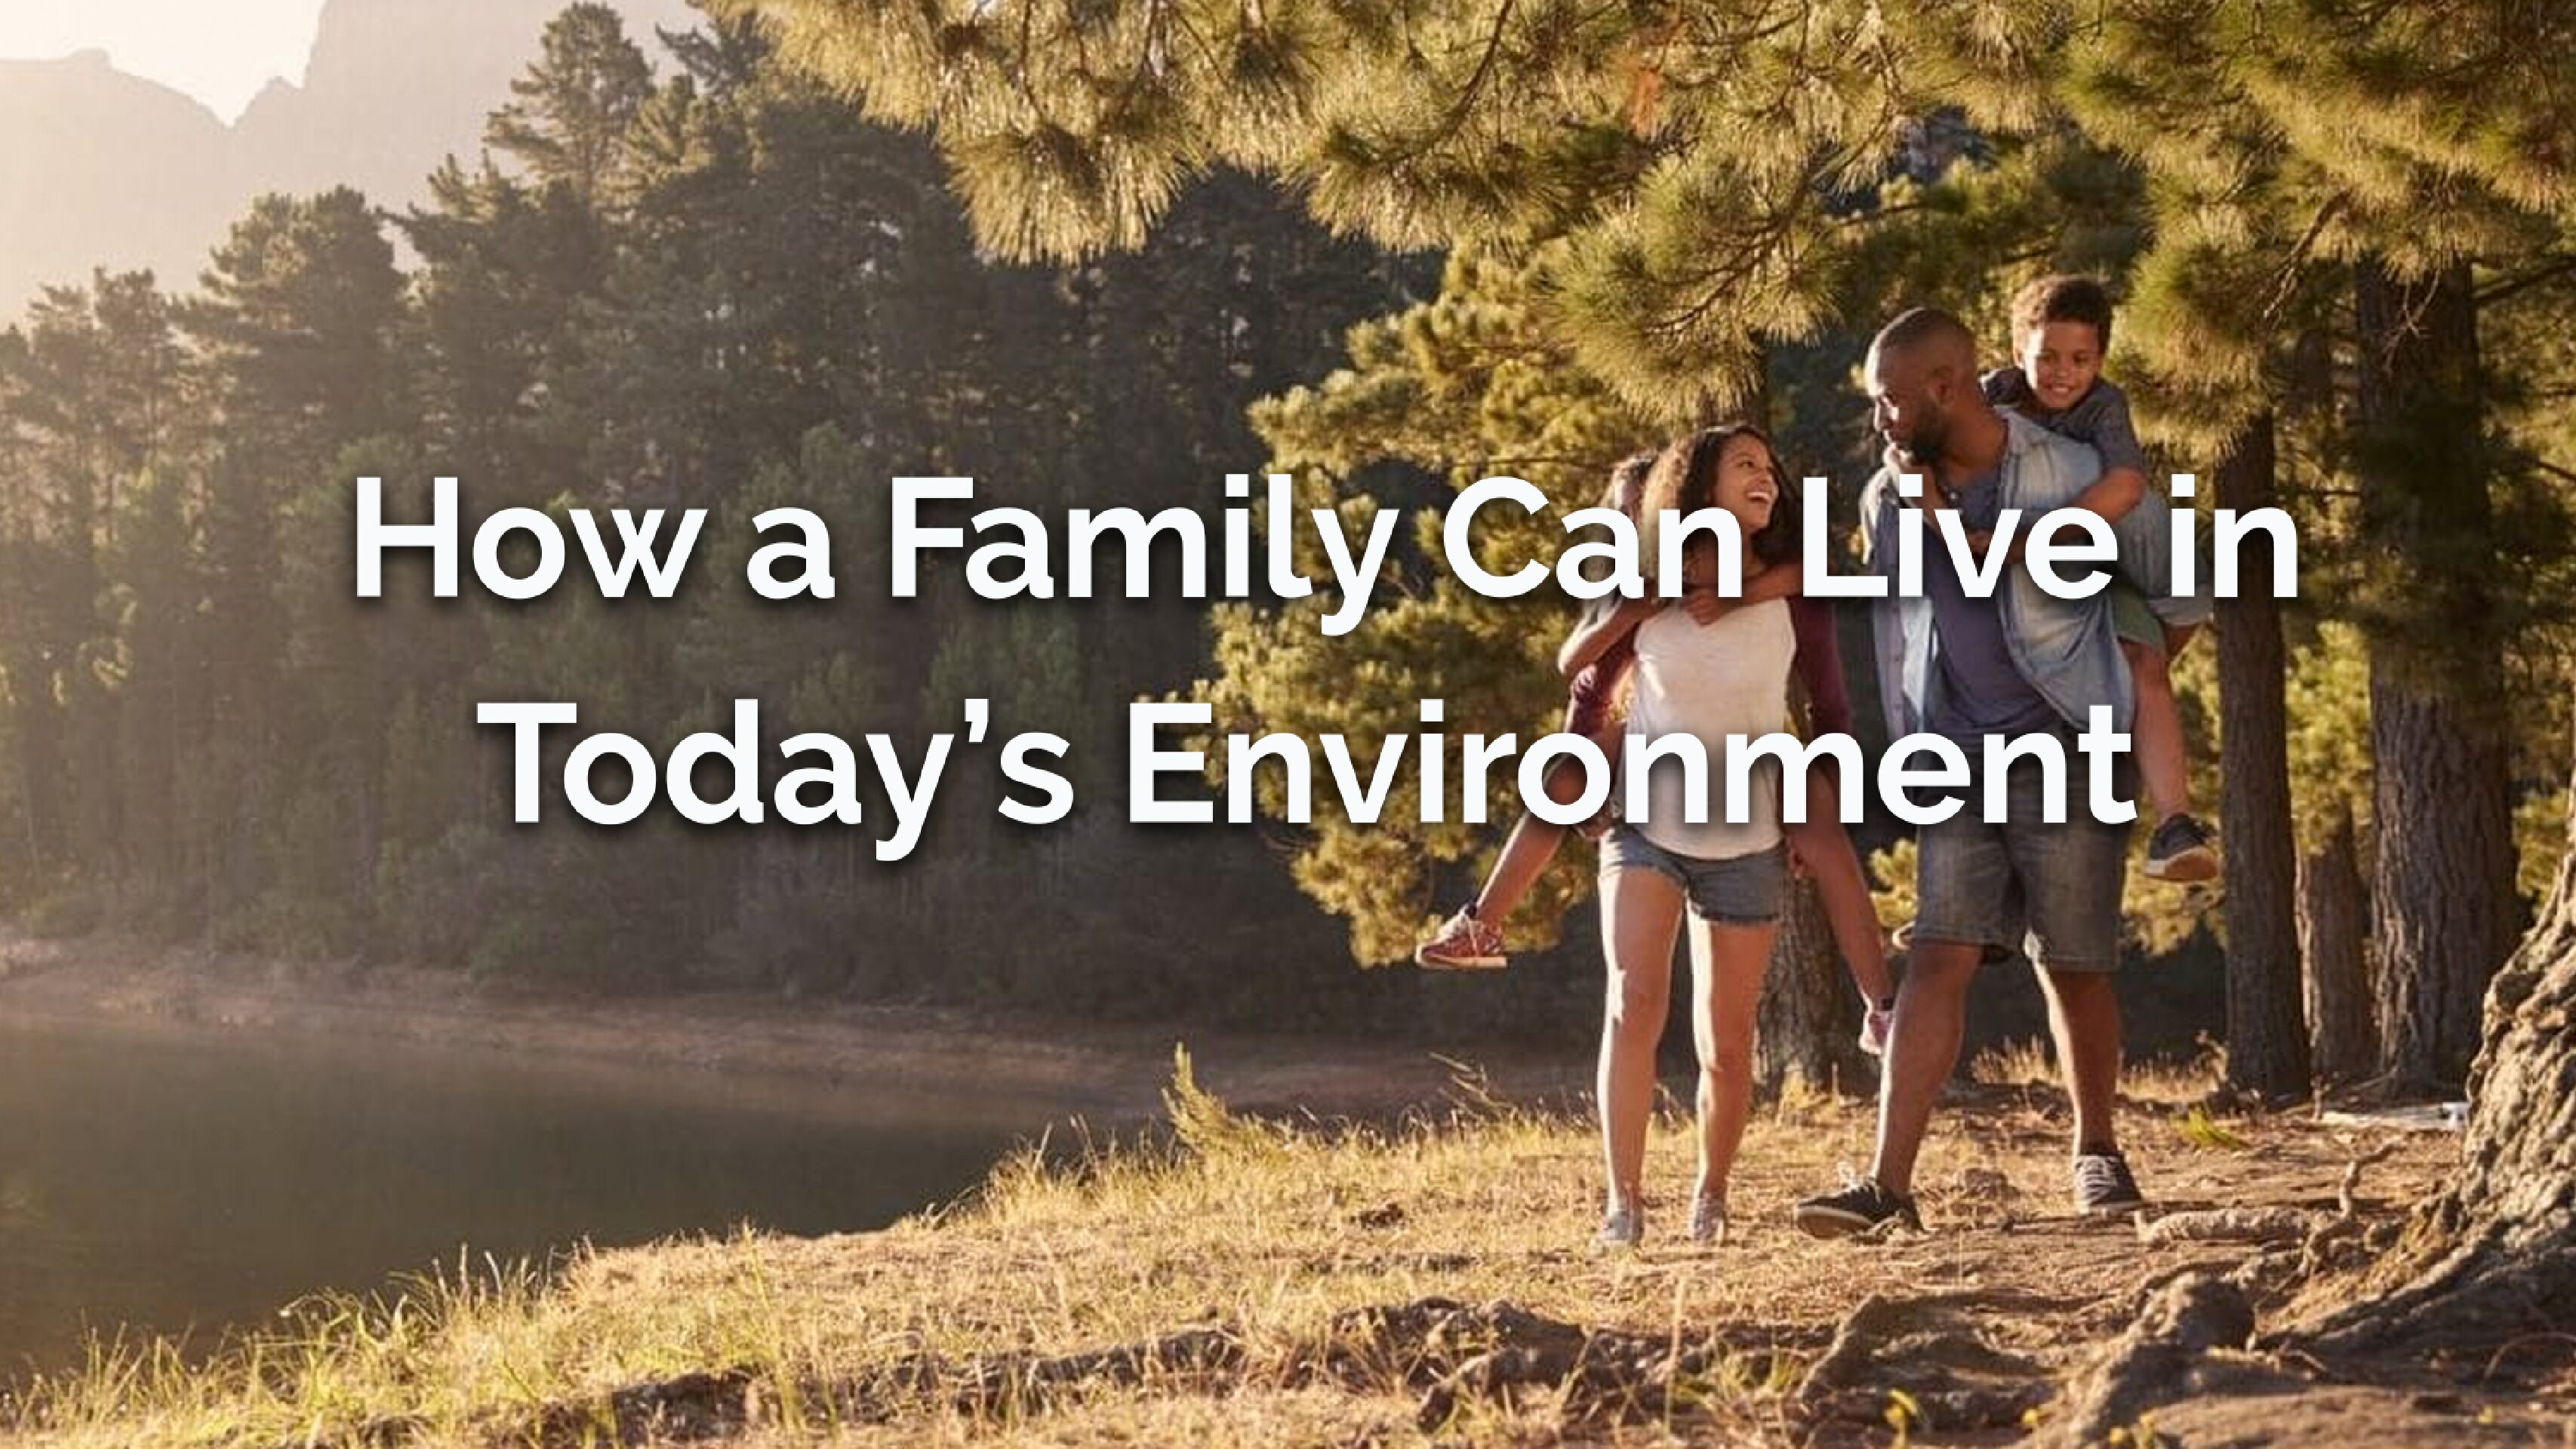 How a Family Can Live in Today’s Environment